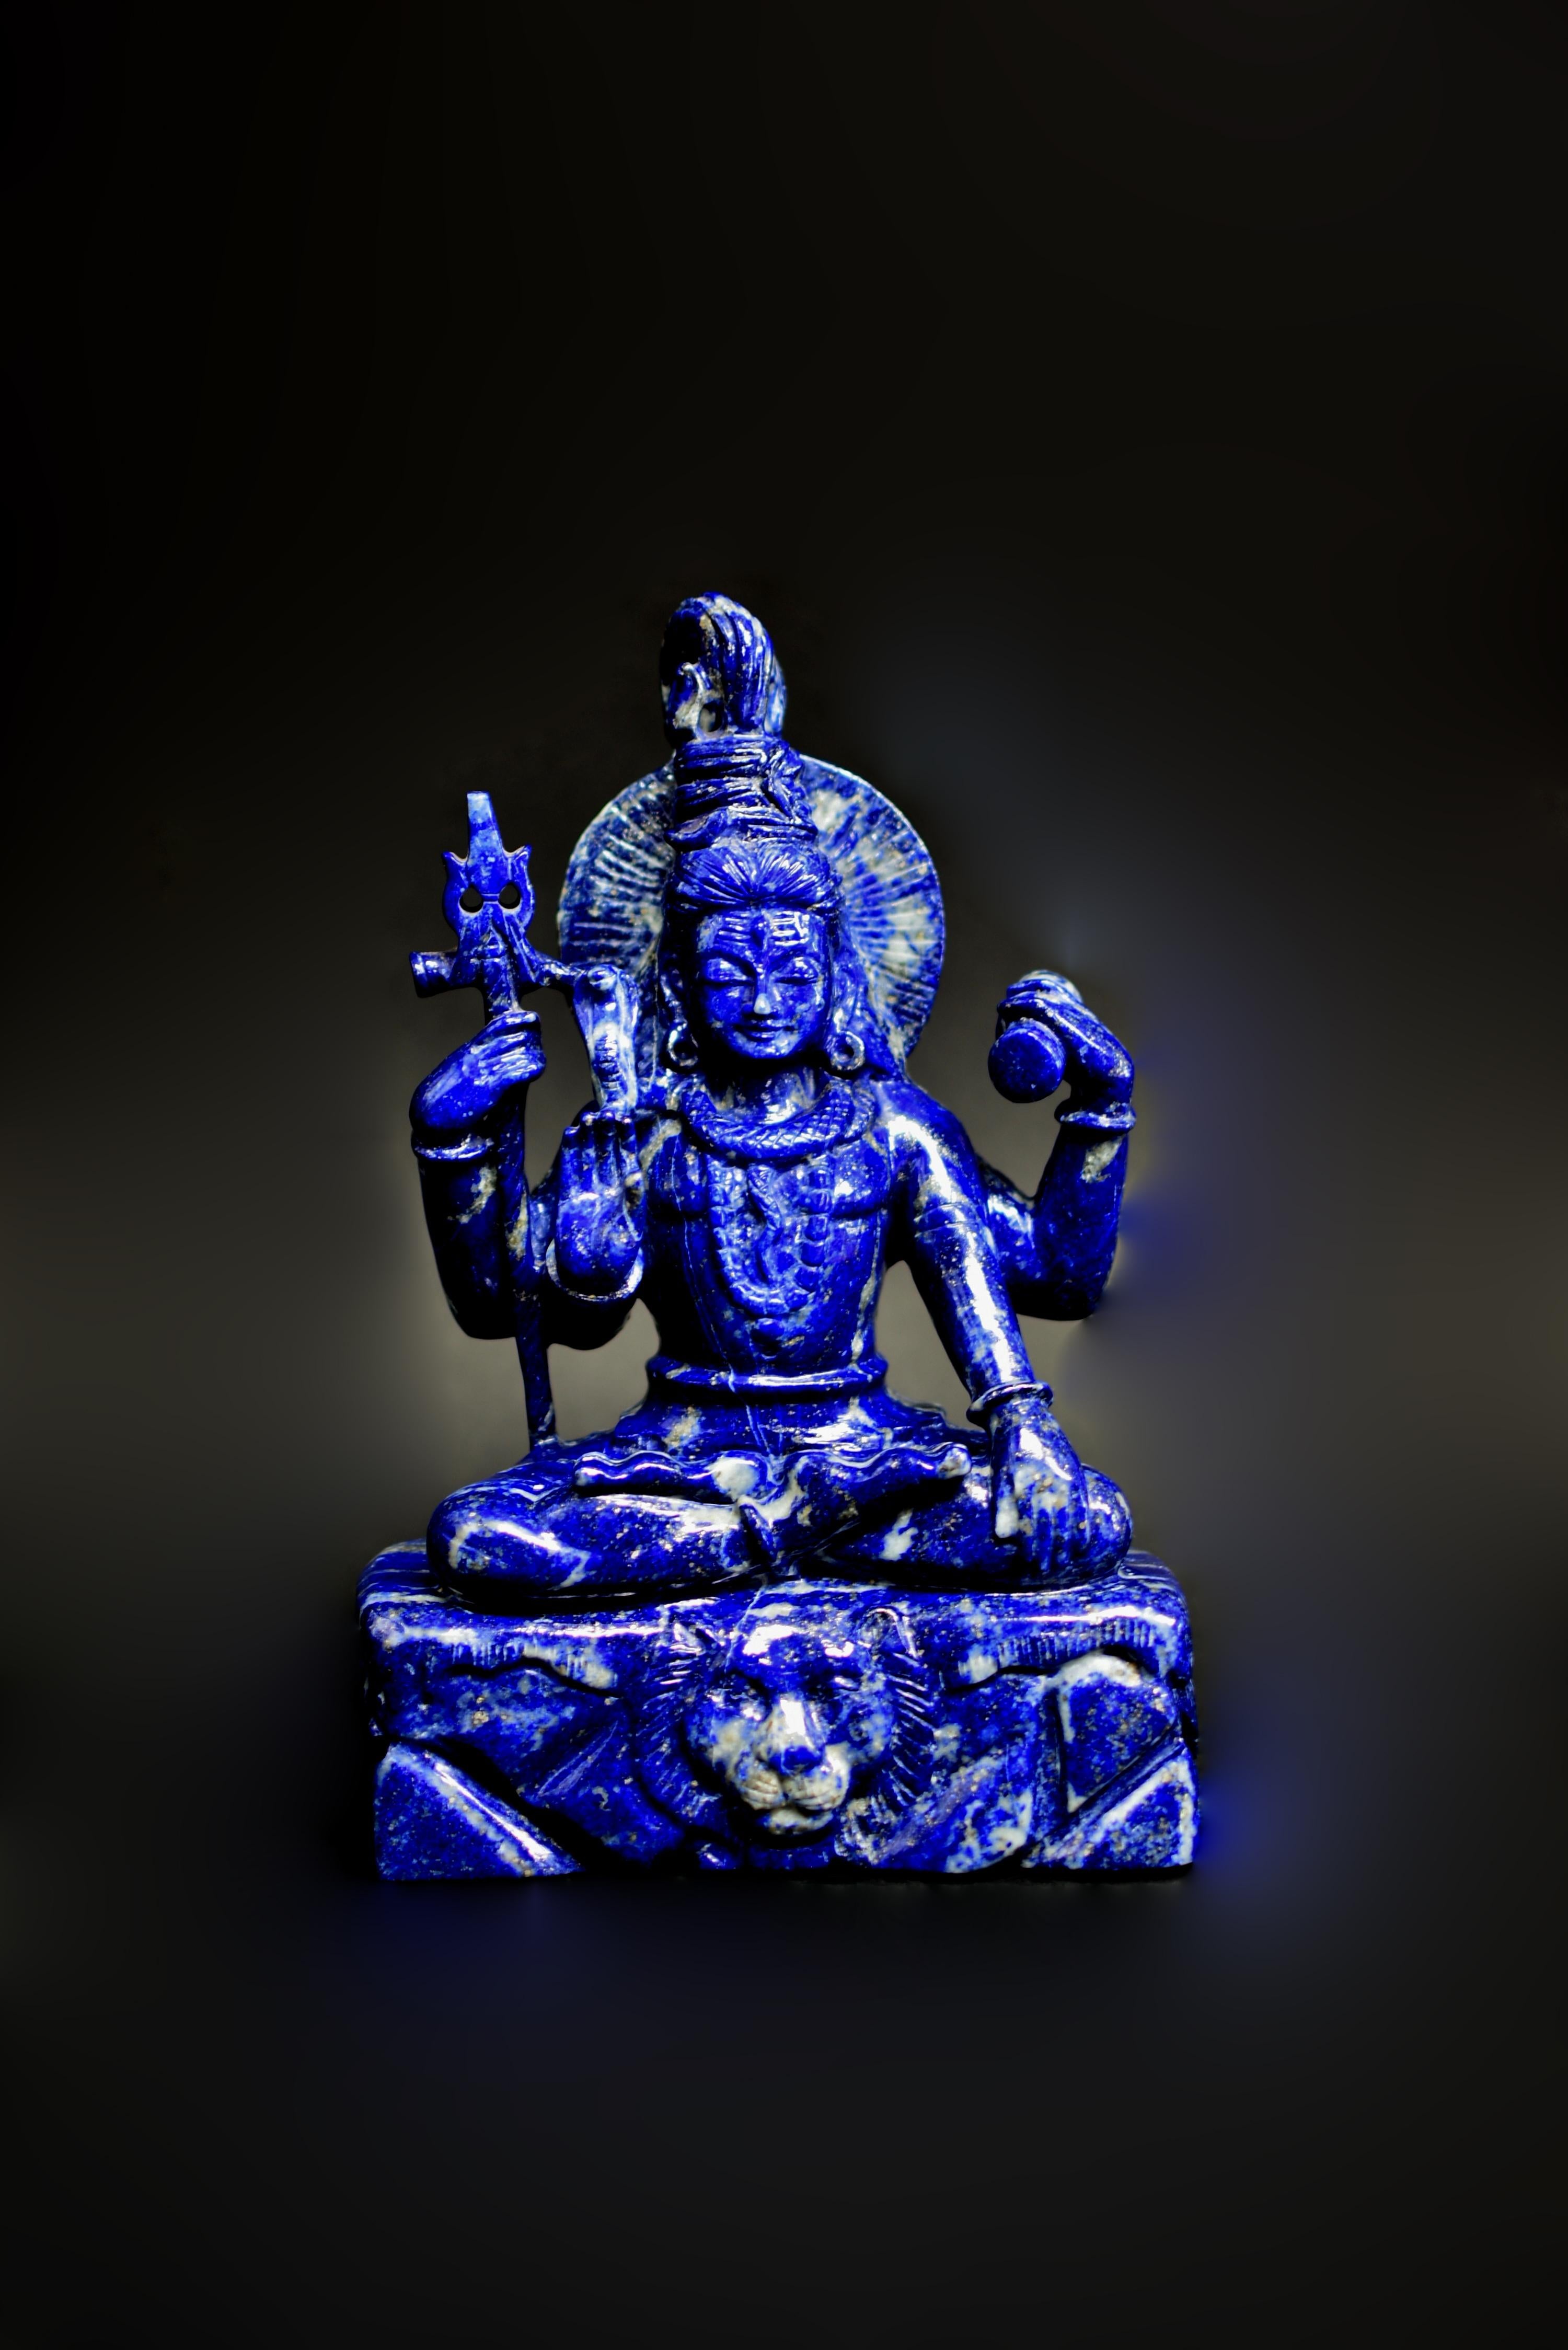 A rare 8.5 lb all natural lapis lazuli statue of Shiva, one of the most worshipped Hindu Gods. Hand carved by a master Indian artist, using the finest lapis lazuli gemstone with the most saturated, brilliant cobalt blue. Seated dyana asana on a